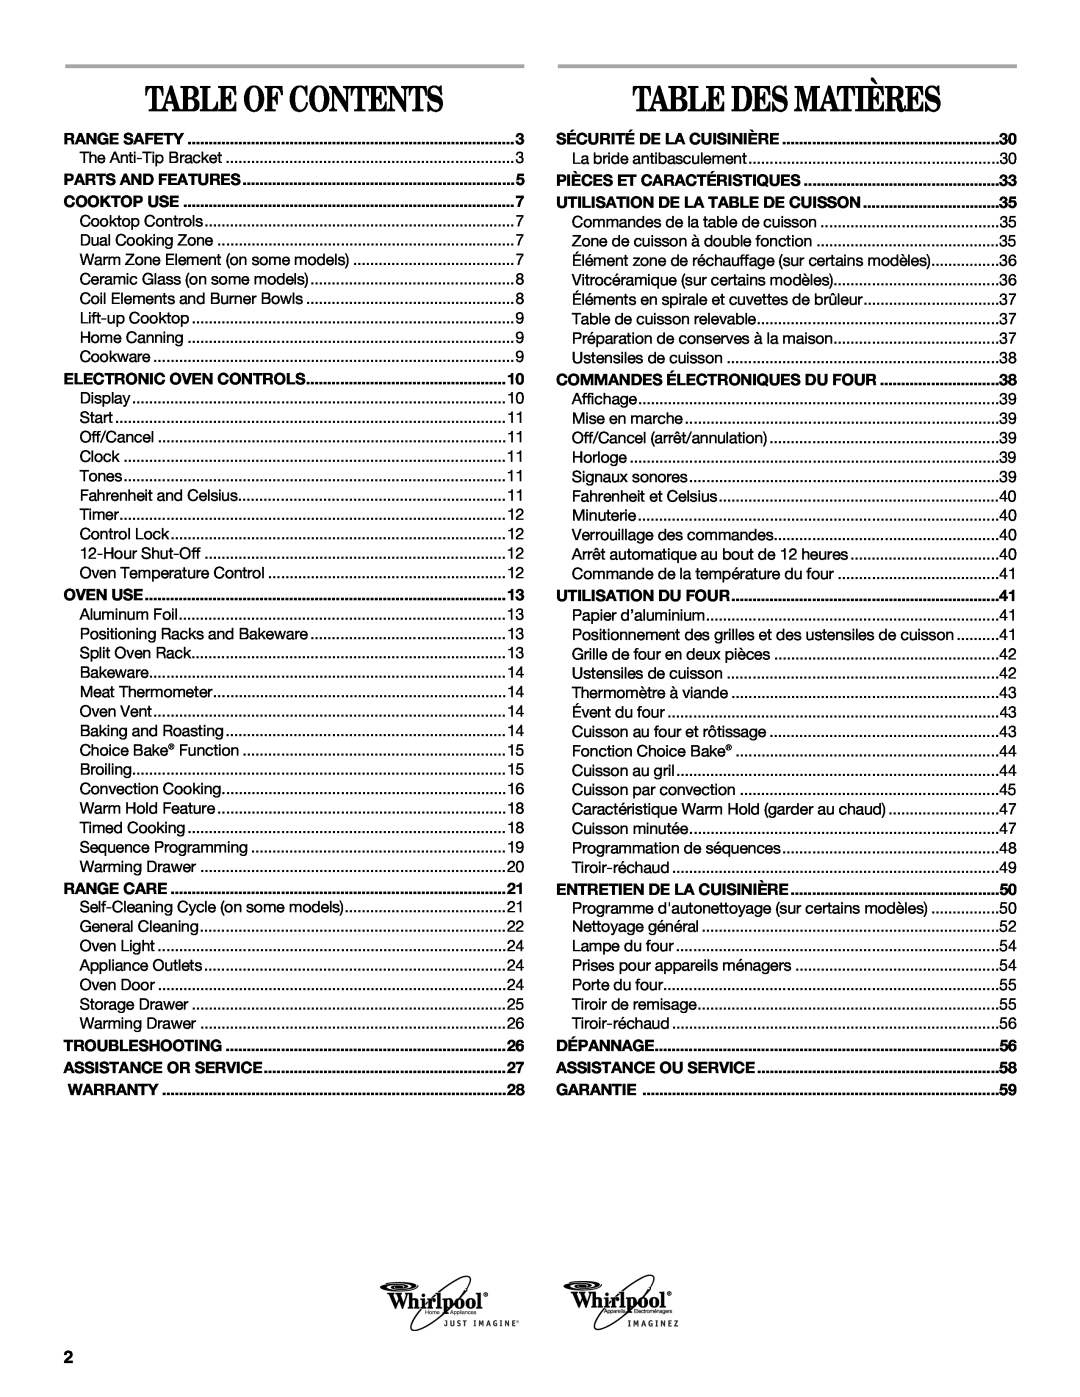 Whirlpool GERC4110PB2 manual Table Des Matières, Table Of Contents 